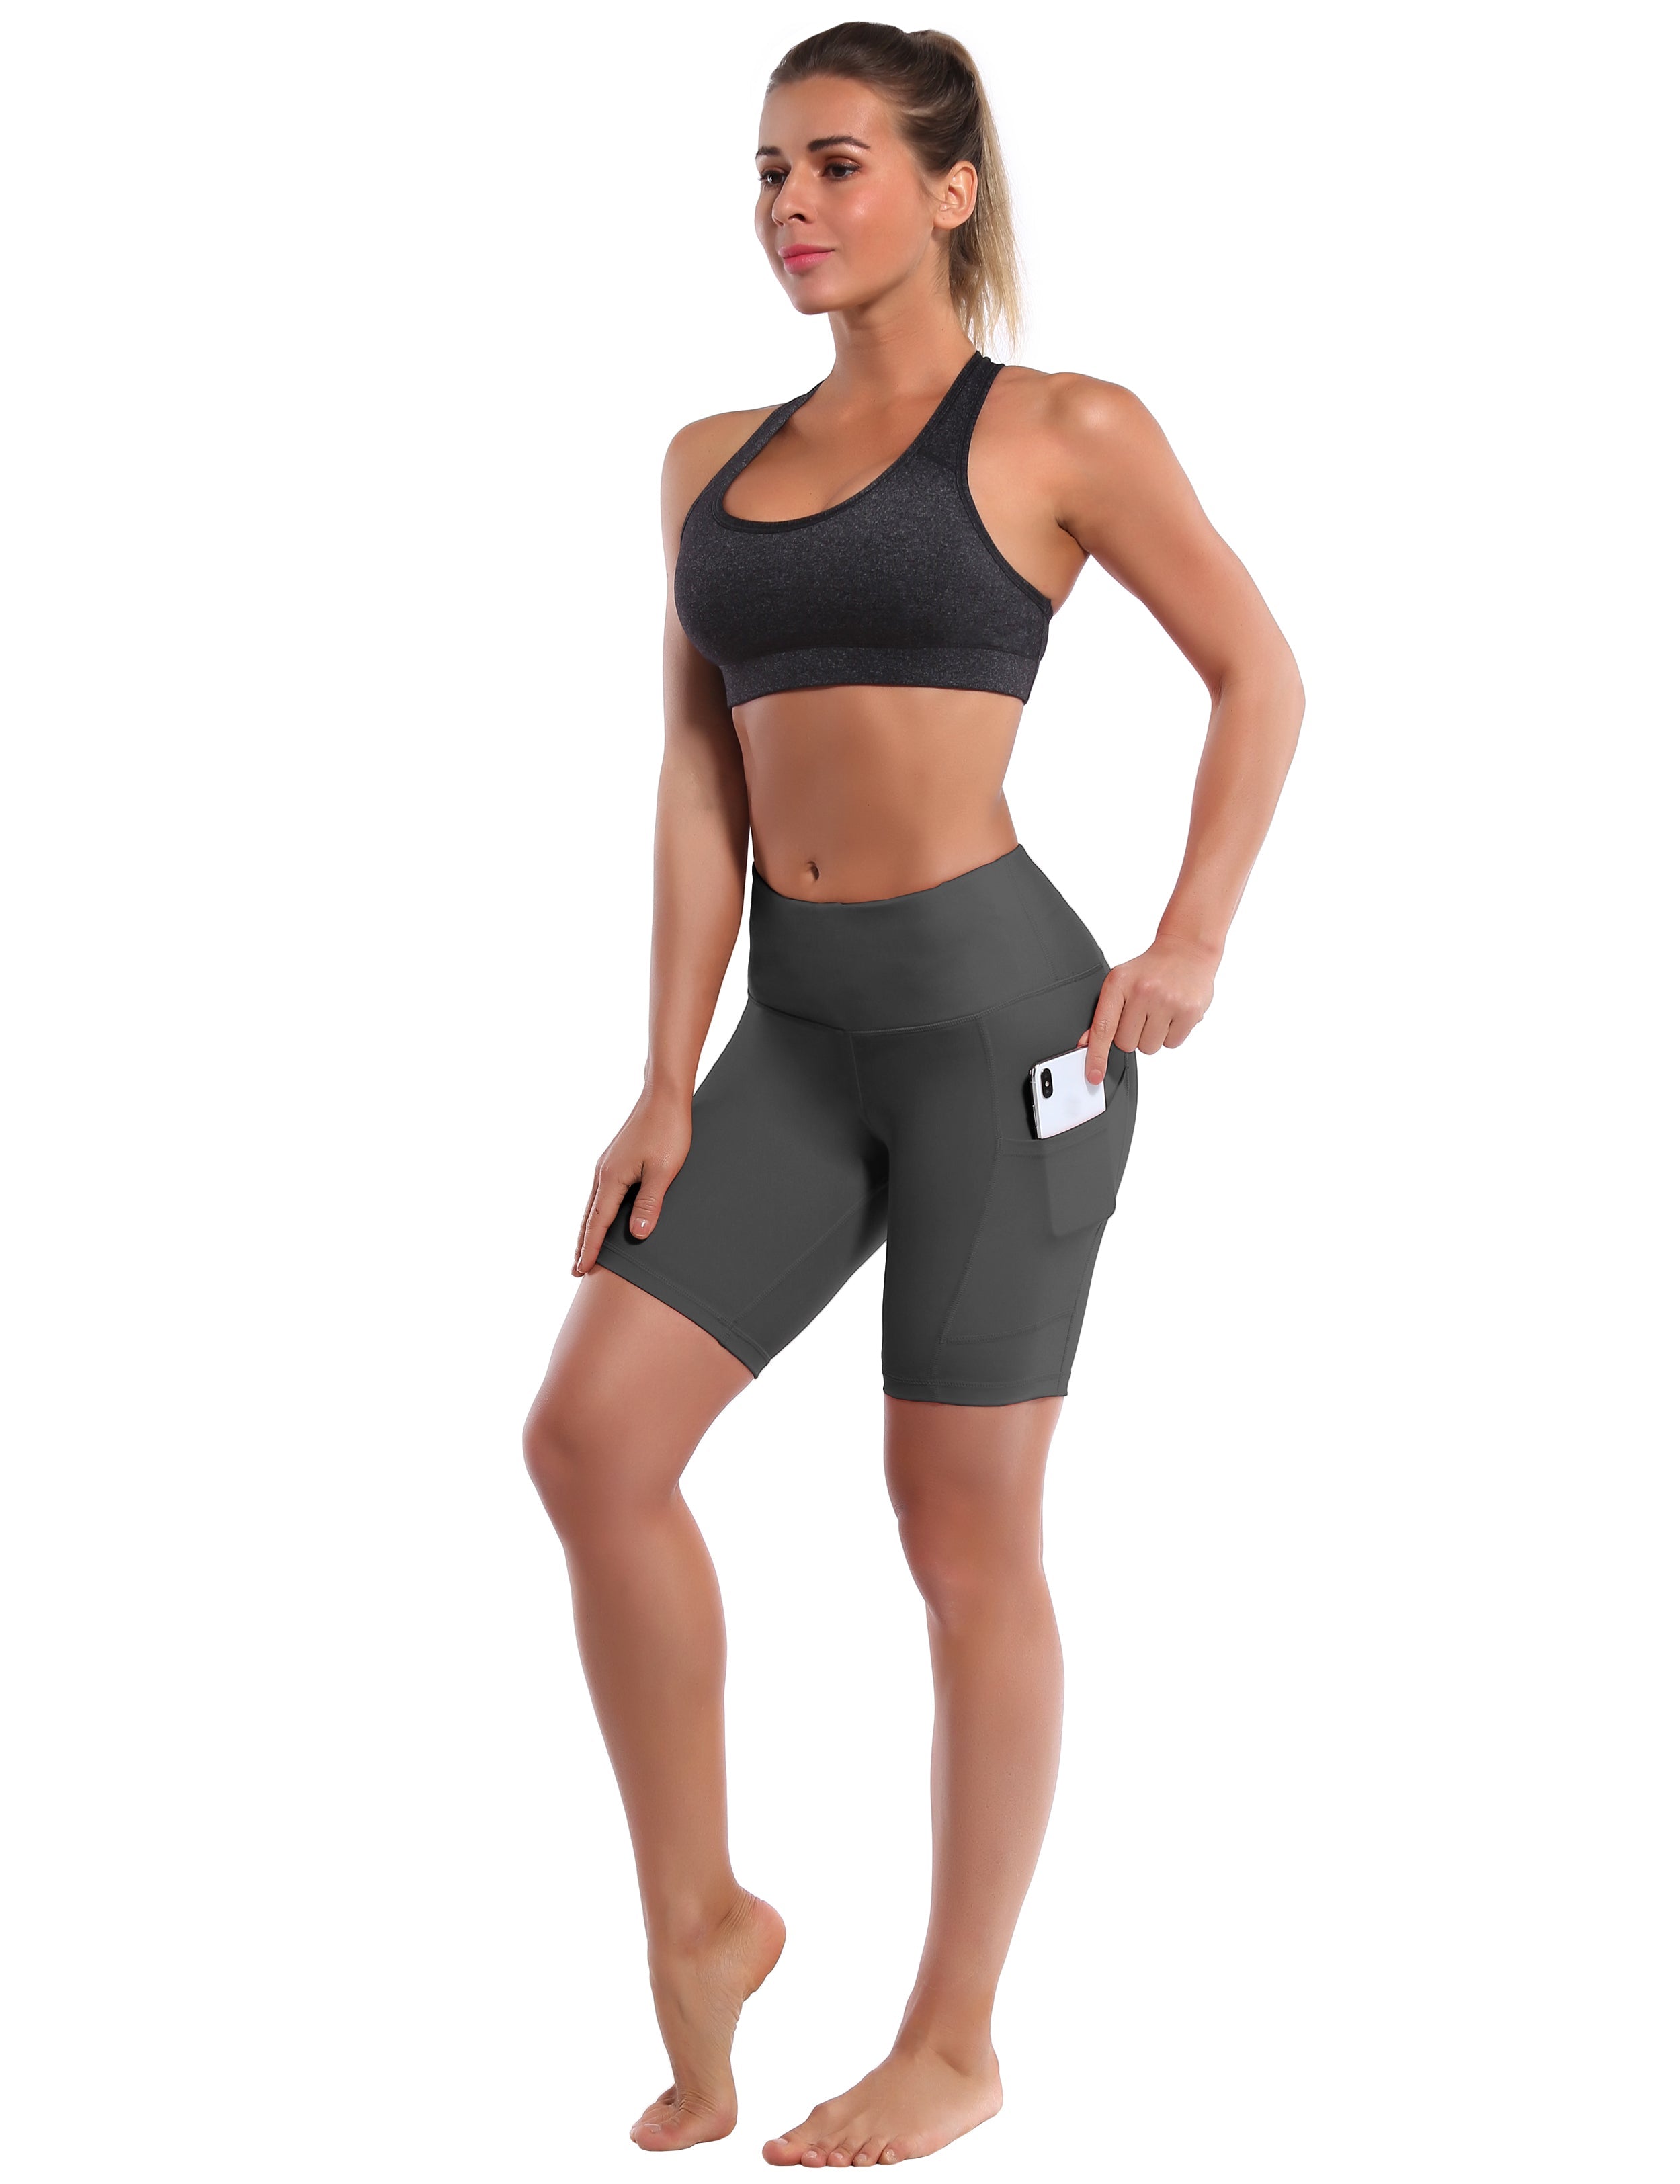 8" Side Pockets Gym Shorts shadowcharcoal Sleek, soft, smooth and totally comfortable: our newest style is here. Softest-ever fabric High elasticity High density 4-way stretch Fabric doesn't attract lint easily No see-through Moisture-wicking Machine wash 75% Nylon, 25% Spandex